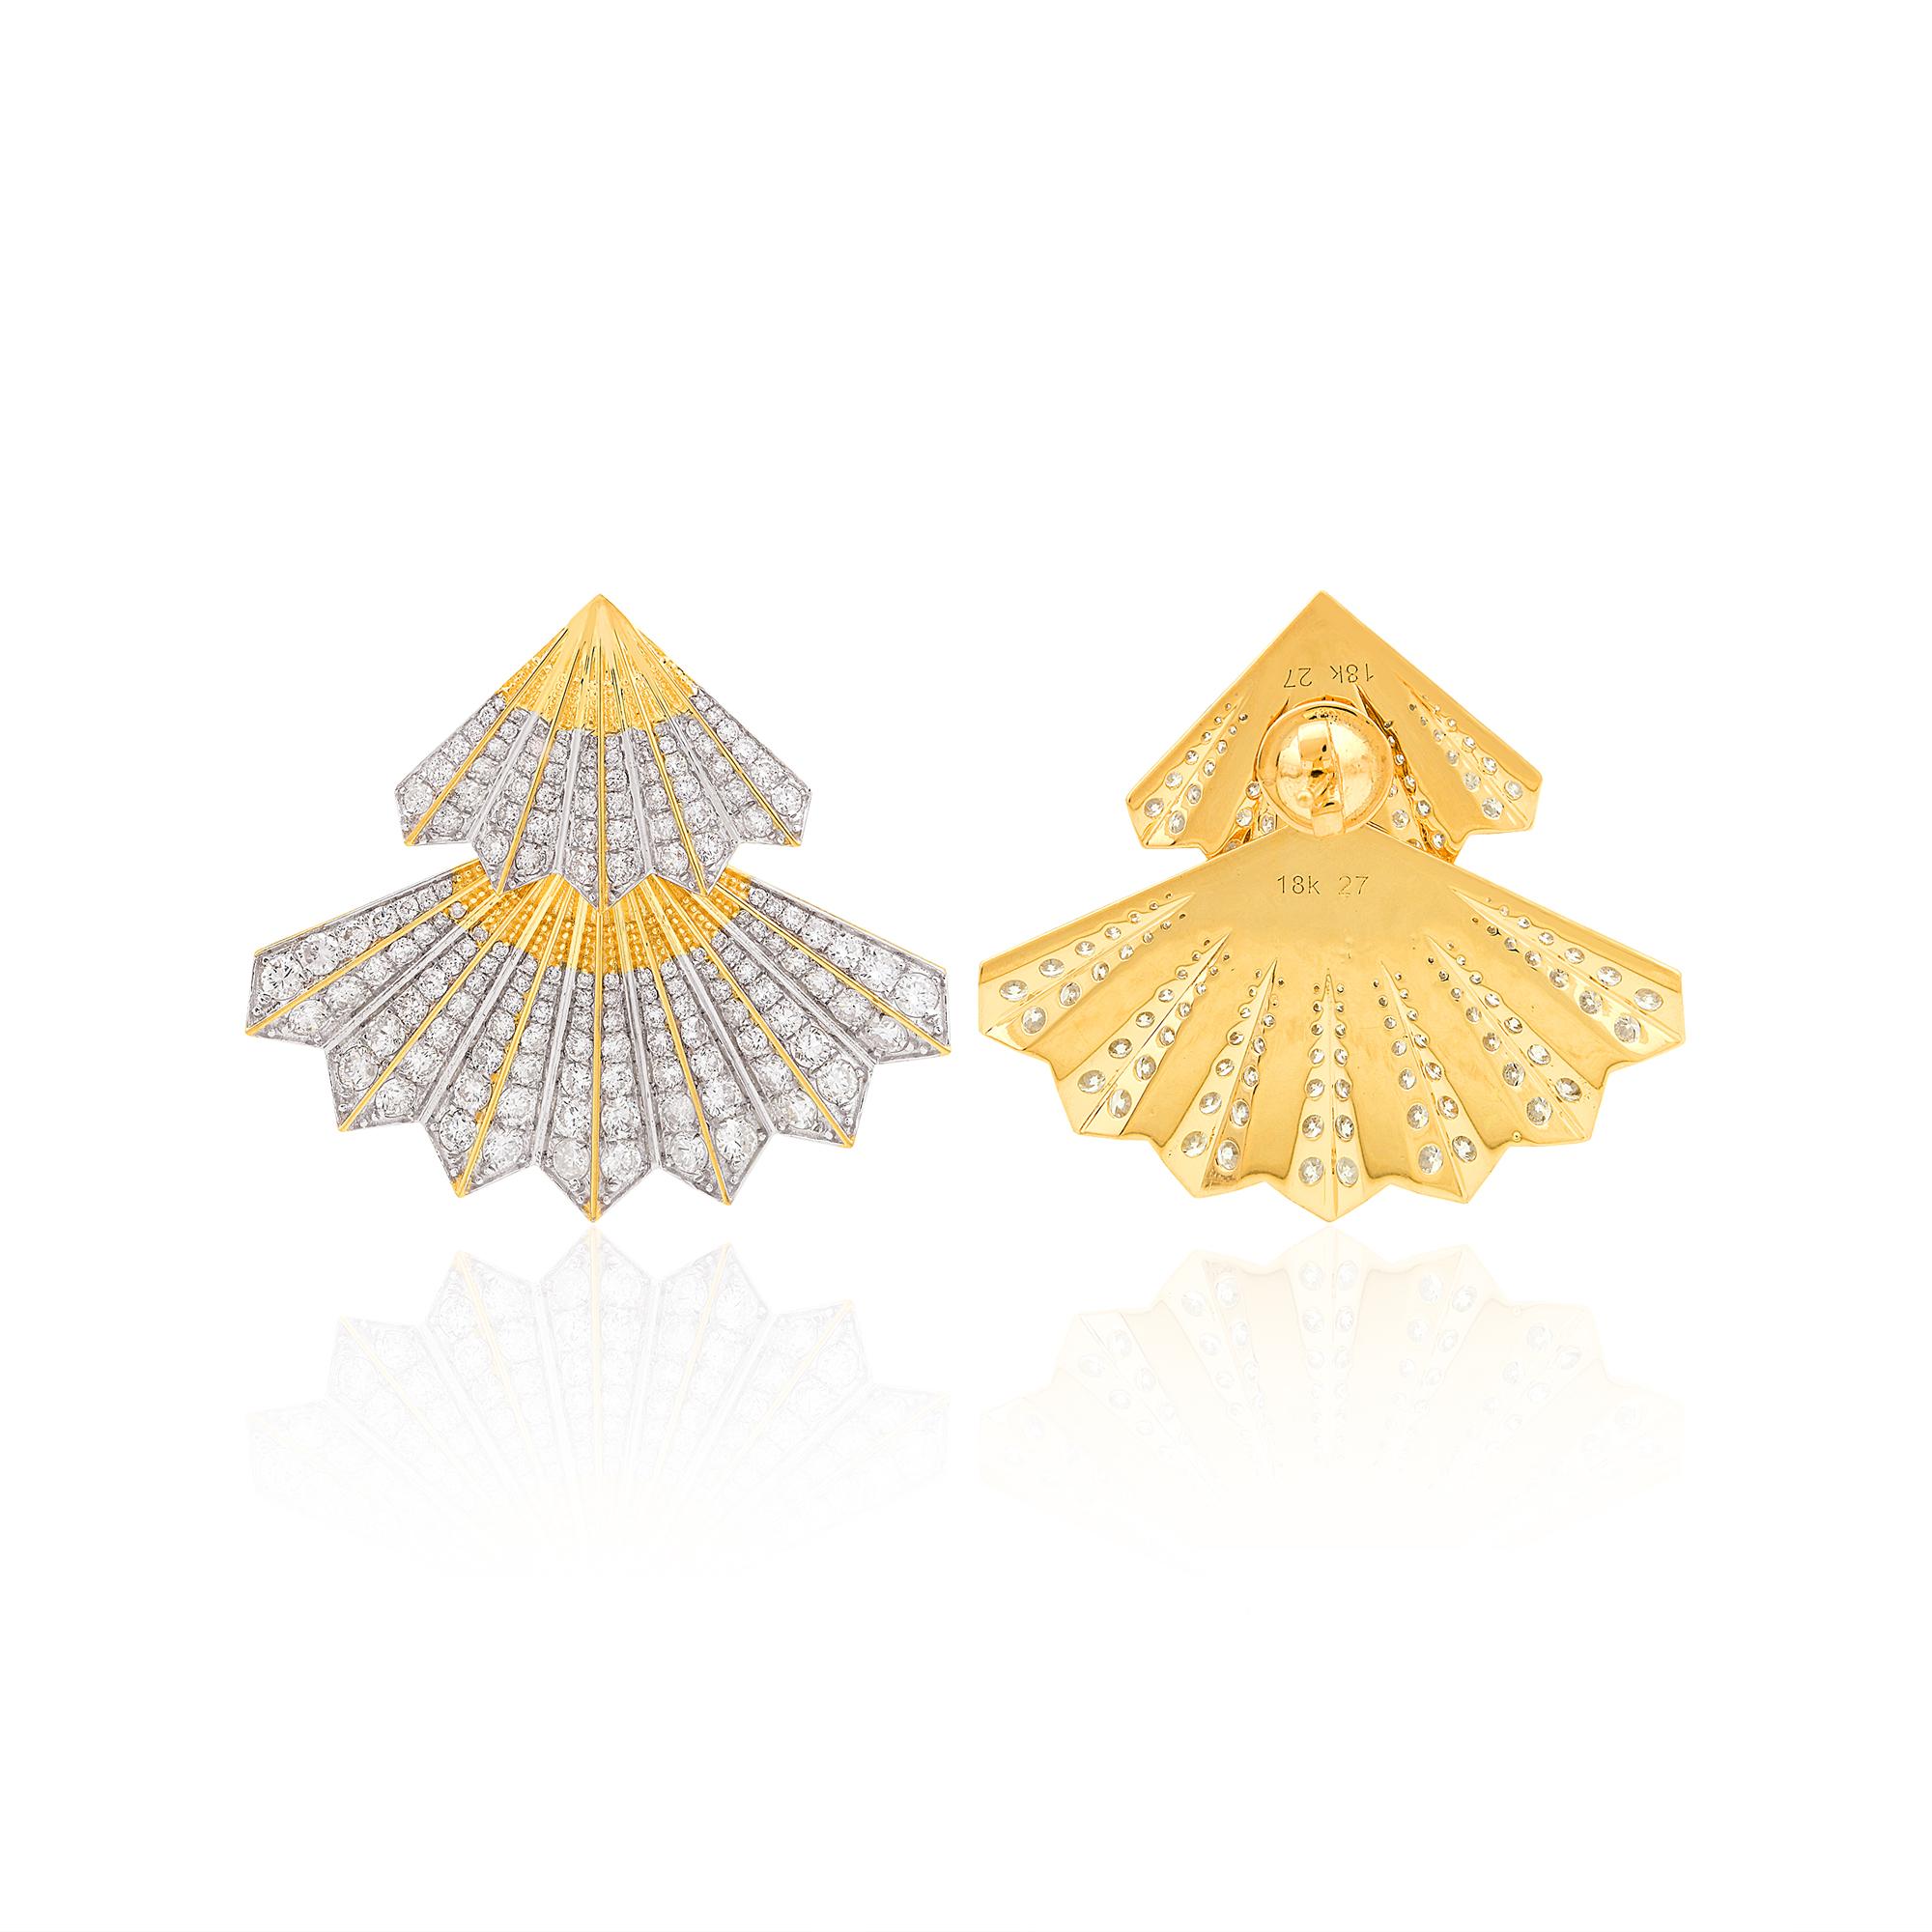 Item Code:- SEE-11616
Gross Weight :-17.46 gm
18k Solid Yellow Gold Weight :- 16.36 gm
Natural Diamond Weight :- 5.50 ct.  ( AVERAGE DIAMOND CLARITY SI1-SI2 & COLOR H-I )
Earrings Size :- 31x37 mm (approx.)

✦ Sizing
.....................
We can